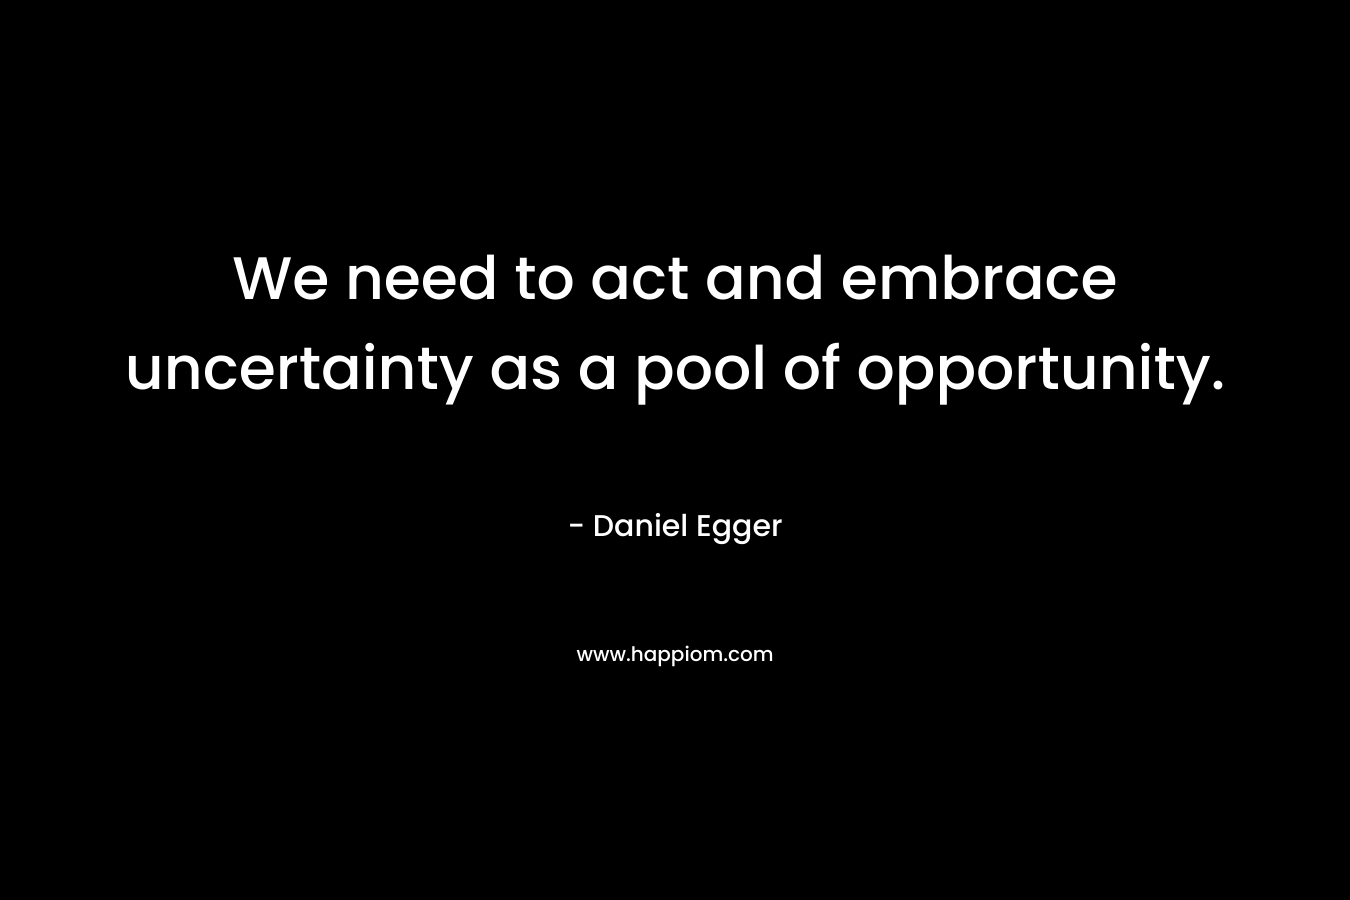 We need to act and embrace uncertainty as a pool of opportunity. – Daniel Egger